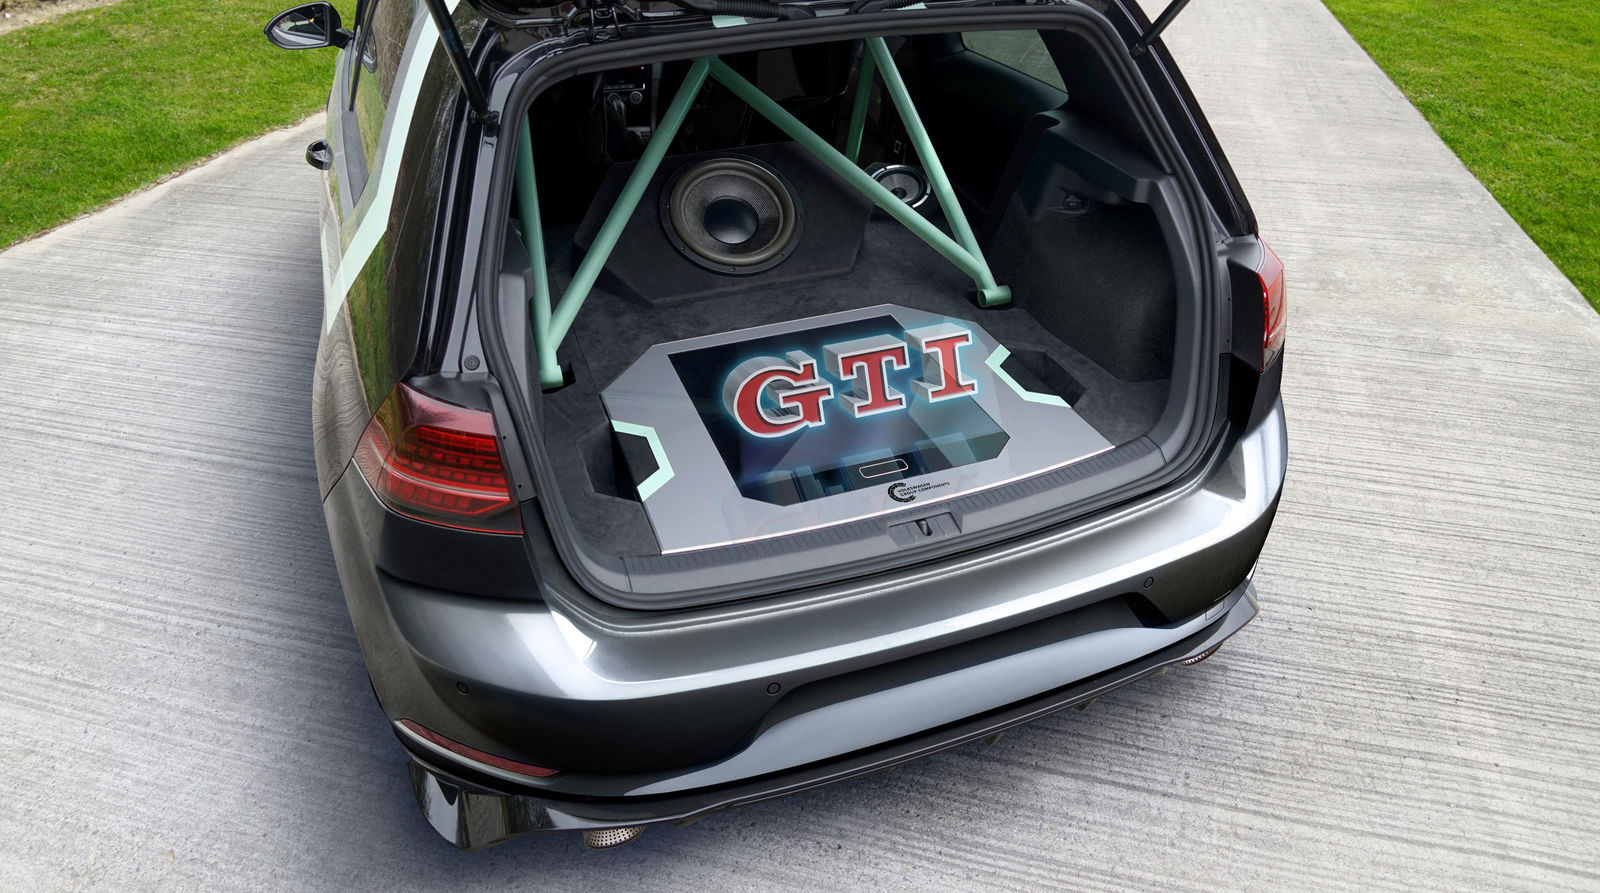 World premiere: An interplay of light and lightness – a hologram in the GTI